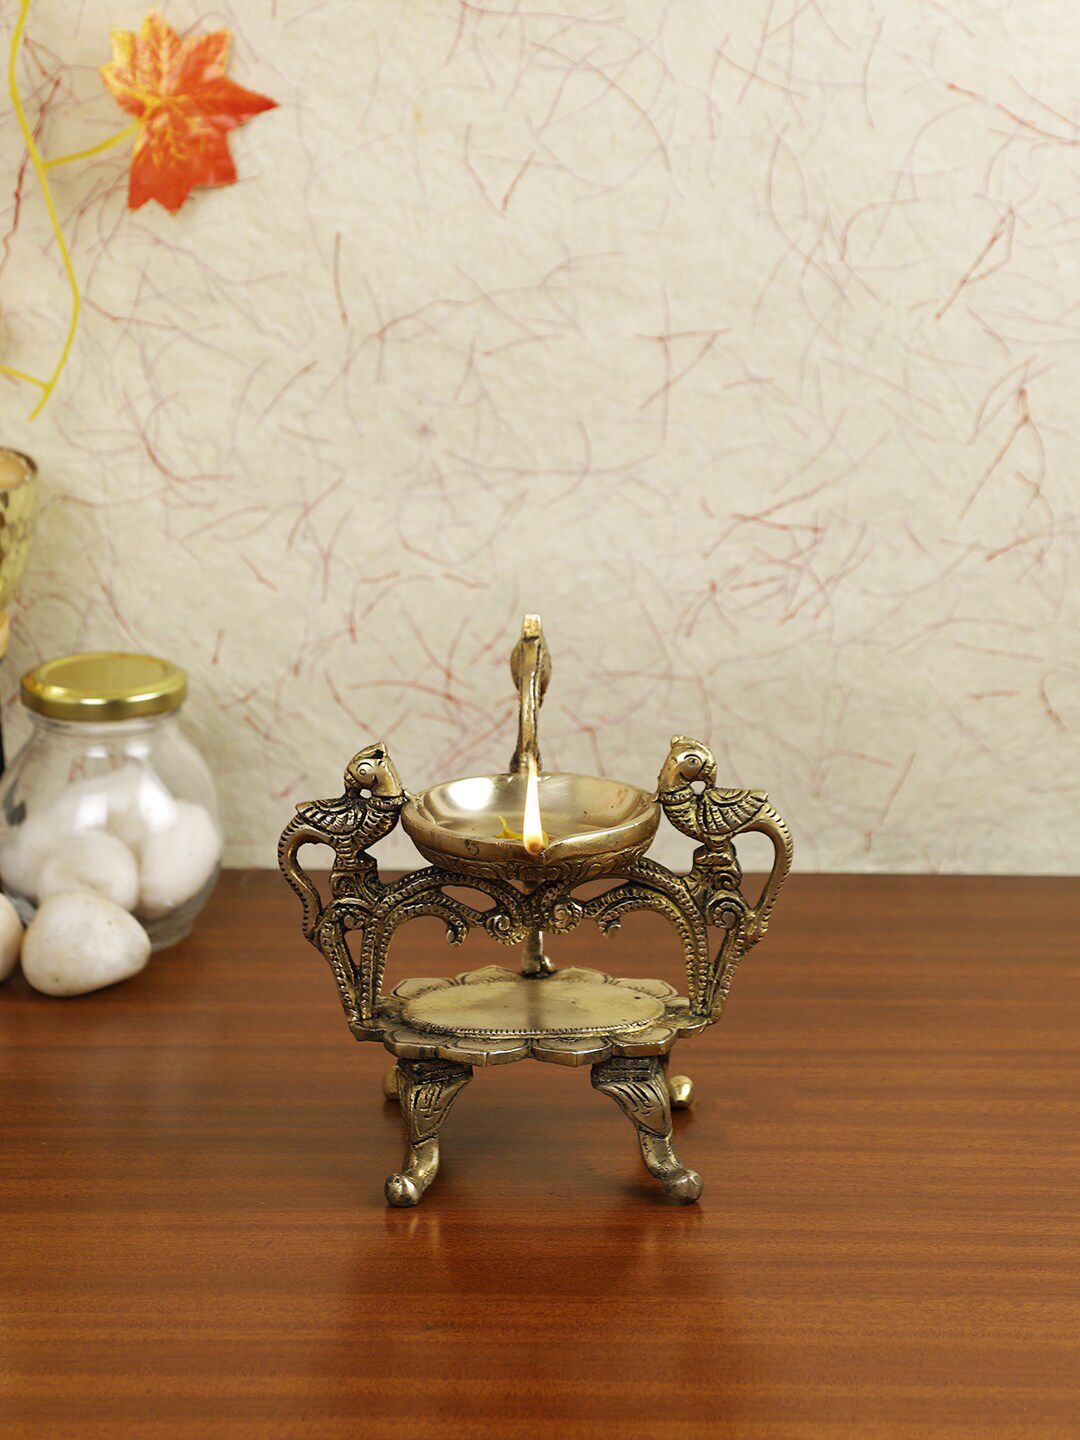 Imli Street Gold-Toned Brass Parrot Diya with 4 Legs Price in India